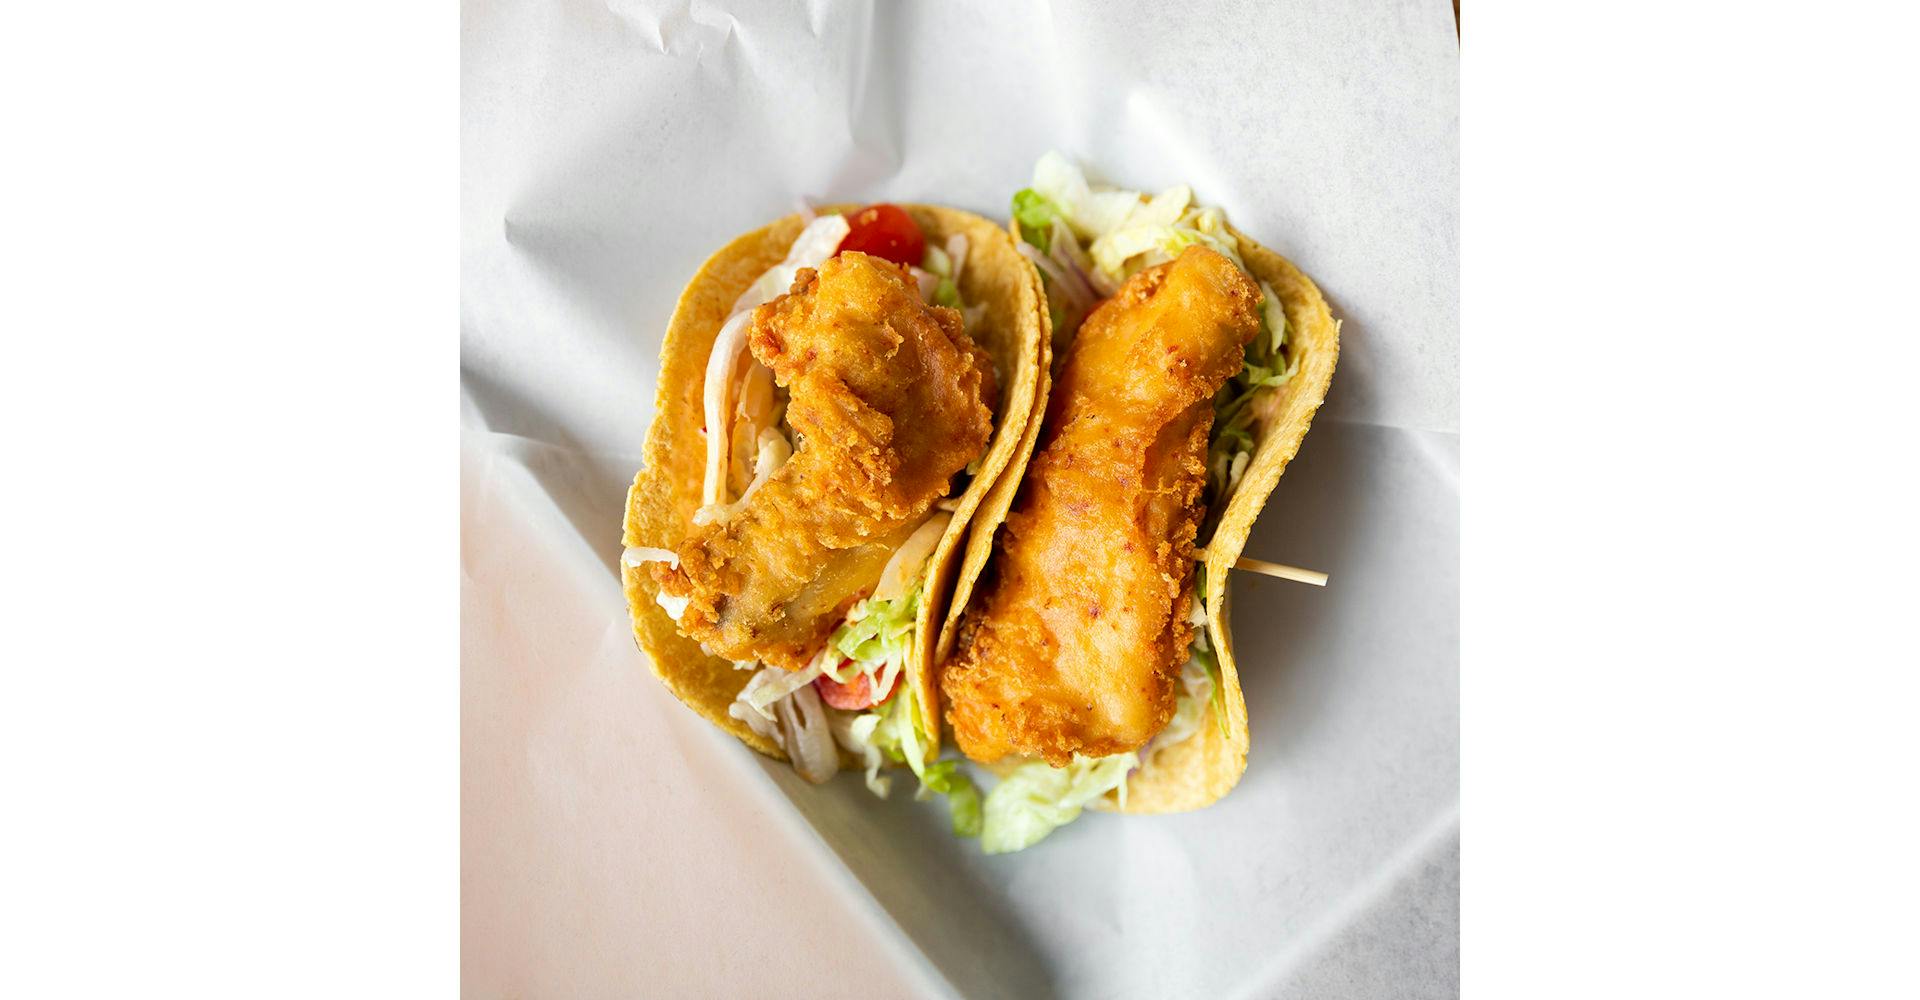 Salmon Fish Tacos from Bites Restaurant in Forest Grove, OR